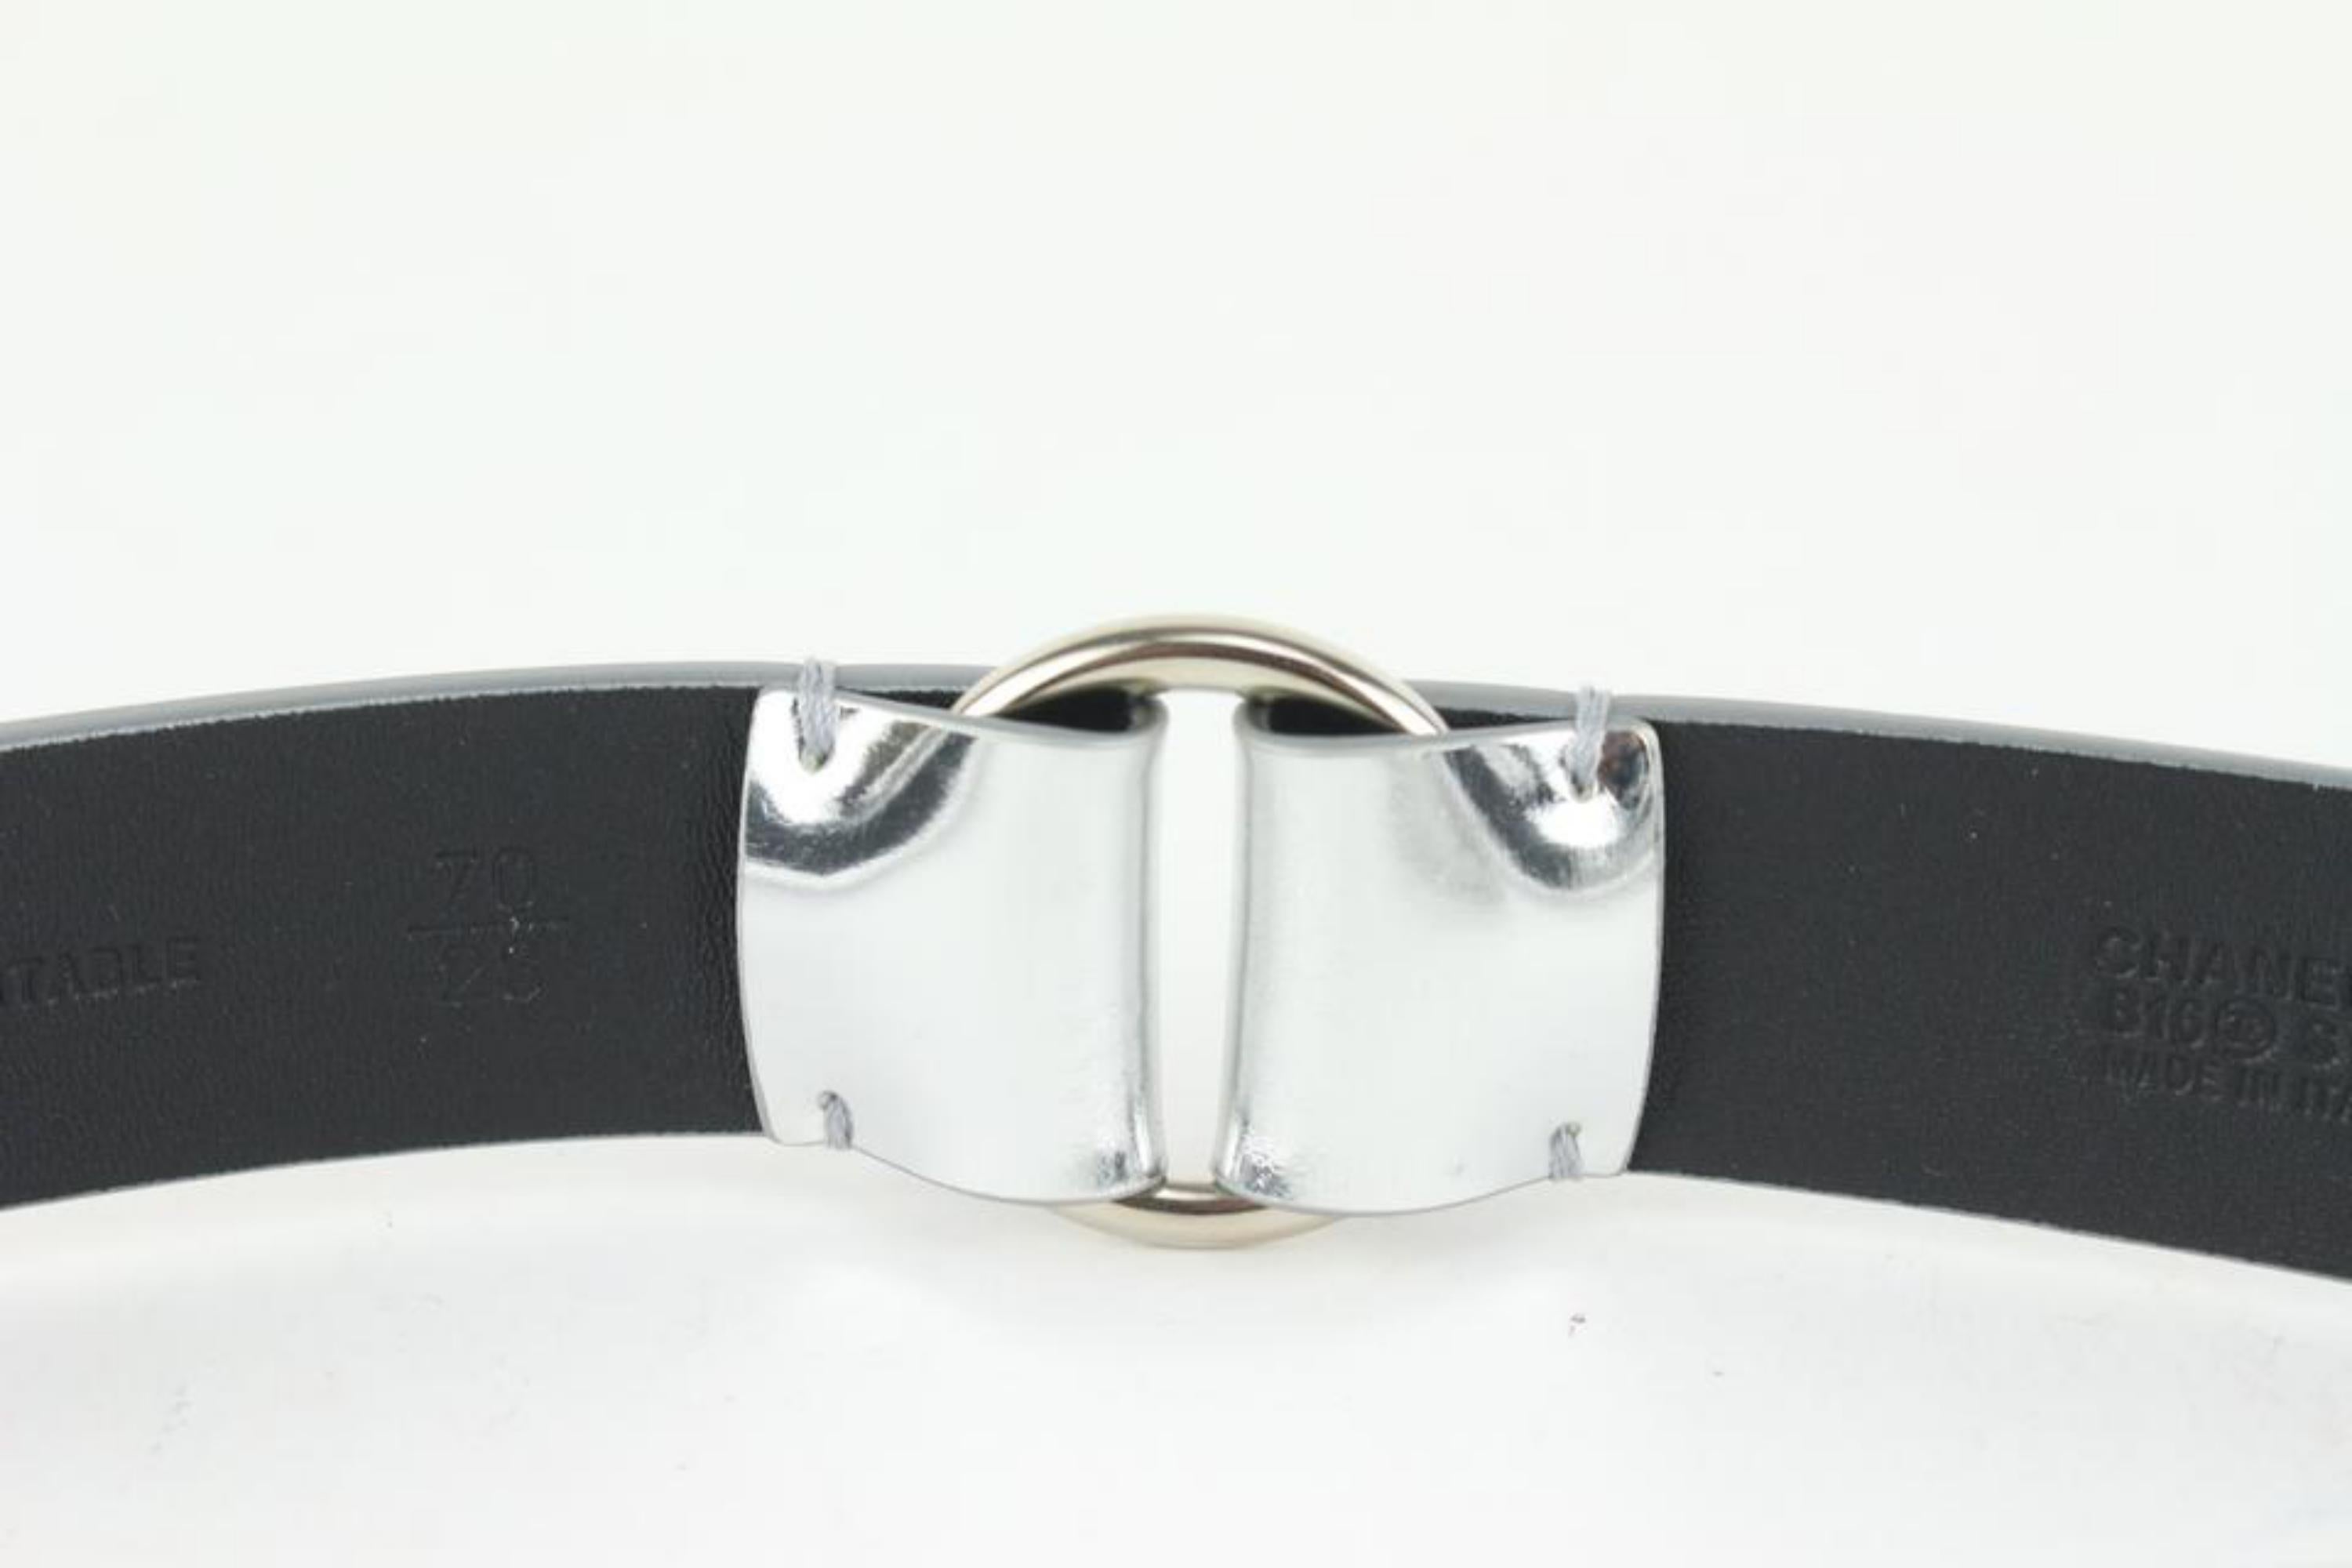 chanel B16S 70/28 Silver Leather CC Logo Belt 106c25 For Sale 3